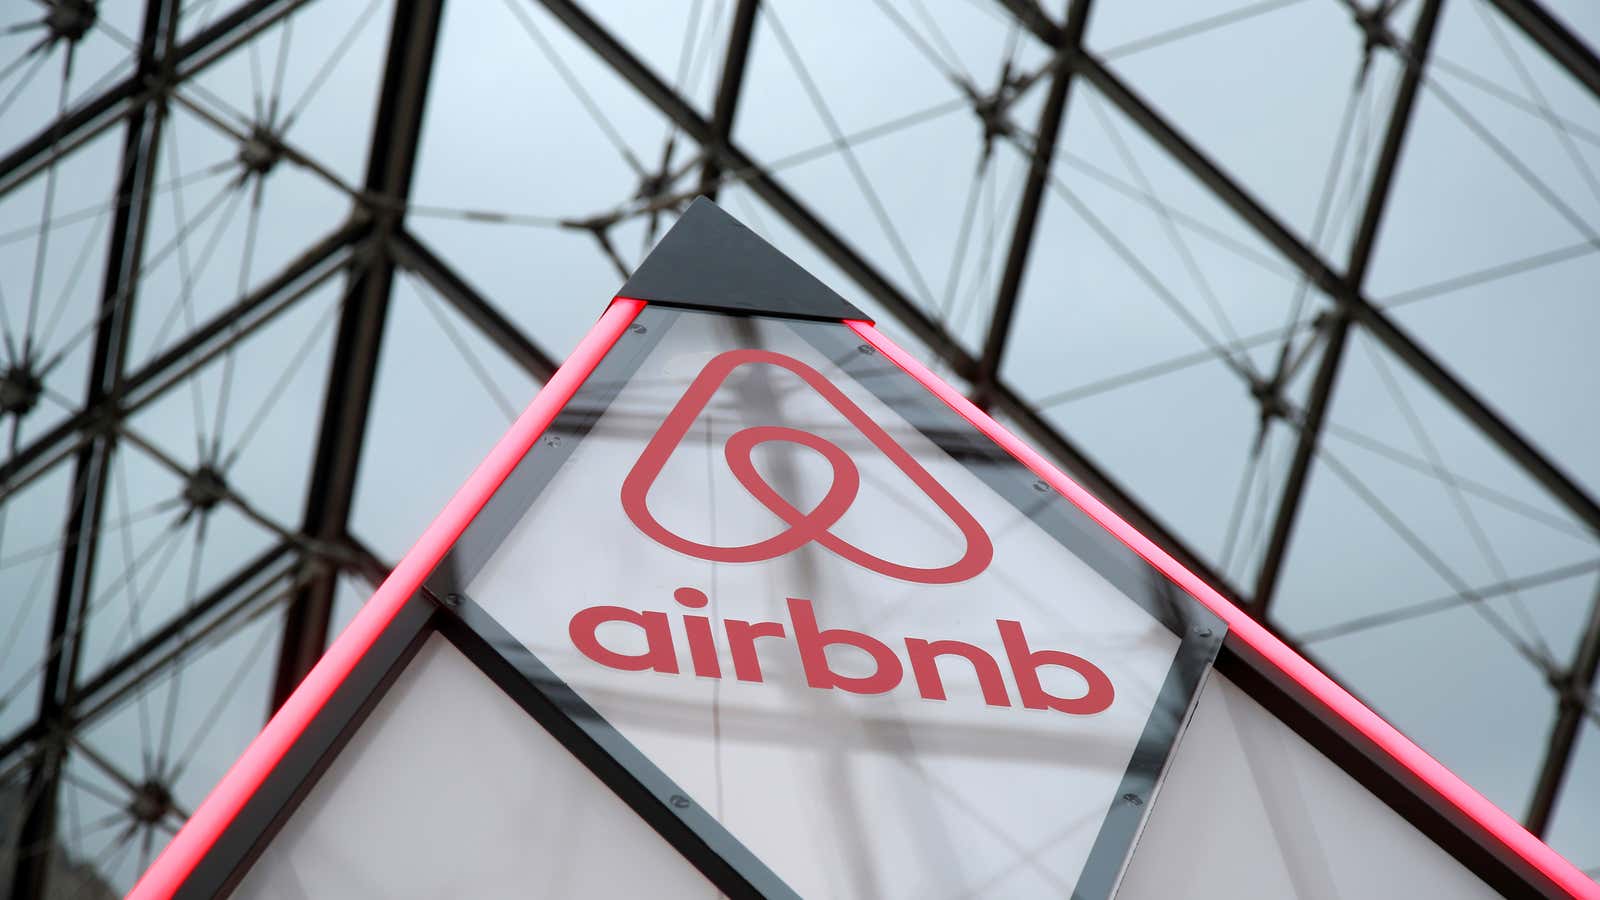 Investors pushed Airbnb’s valuation north of $100 billion, doubling its listed price in a single day.